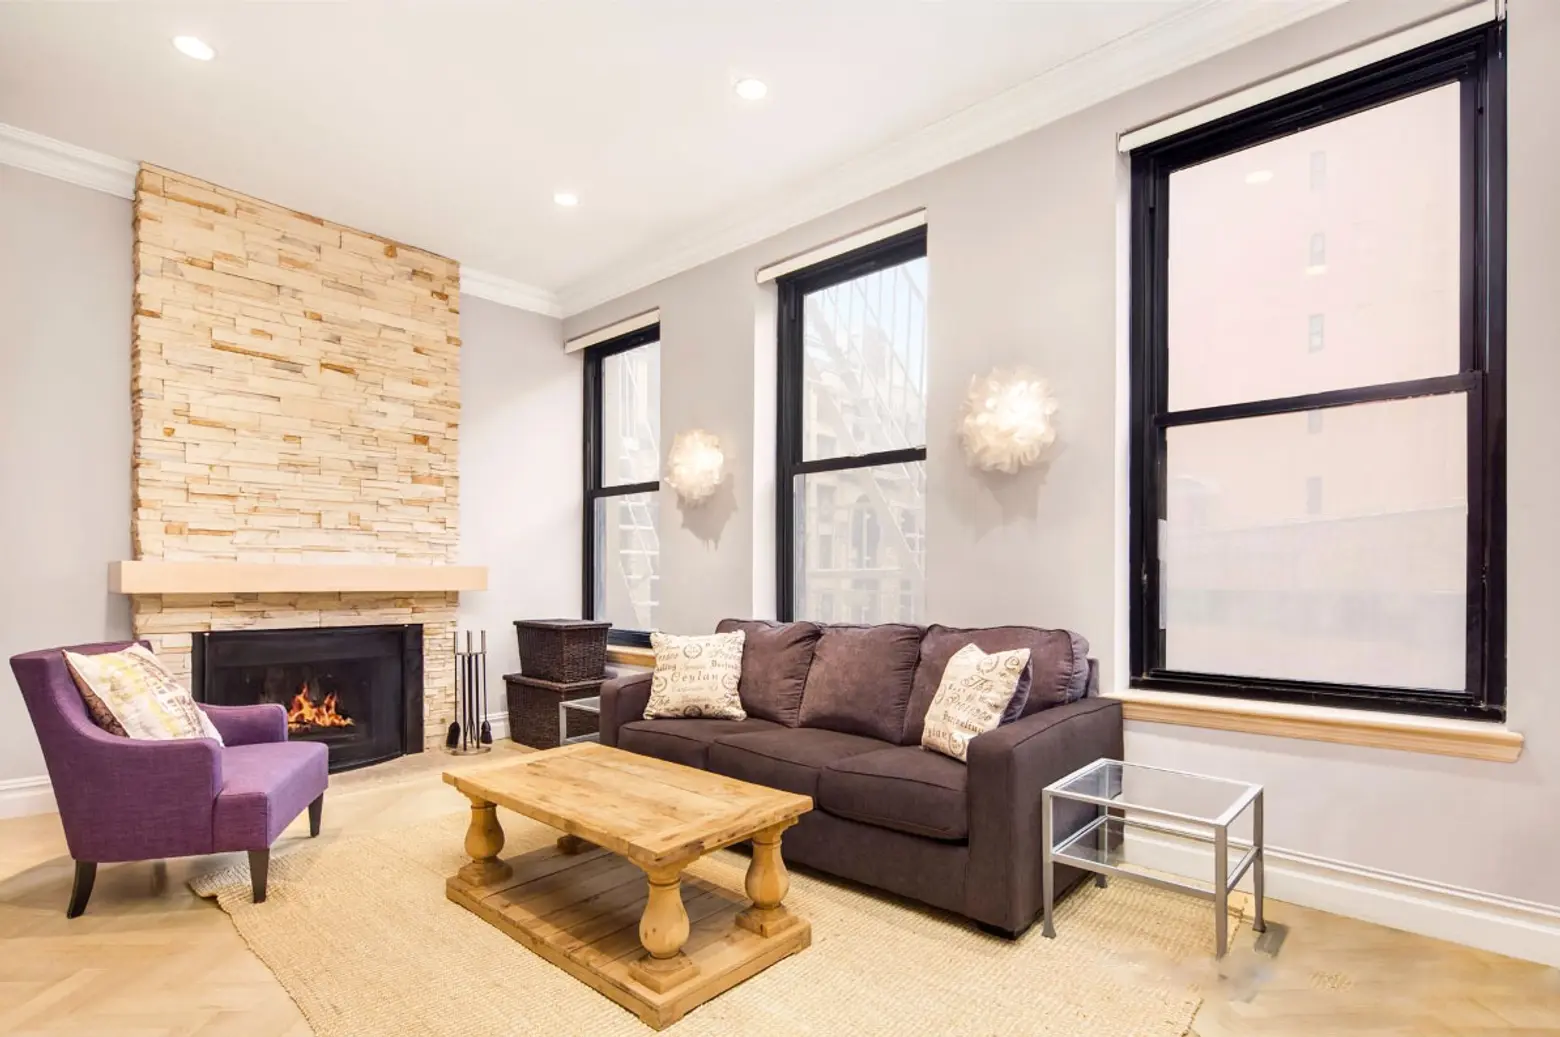 250 Mercer Street, Jessica Chastain, NYC celebrity real estate, duplexes